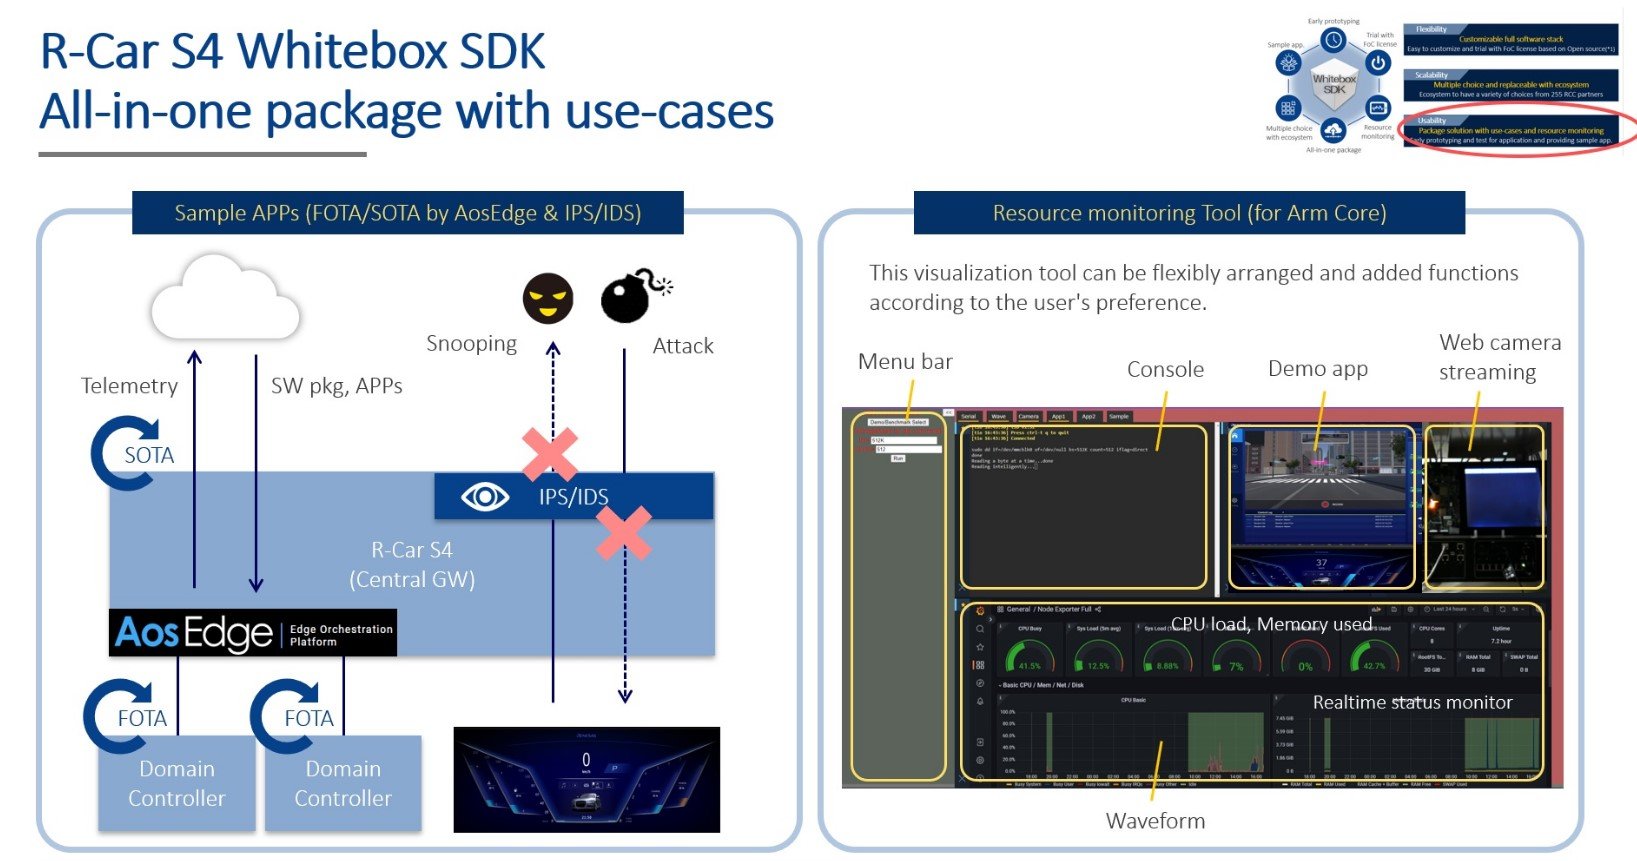 R-Car S4 Whitebox SDK - All-in-one package with use-cases